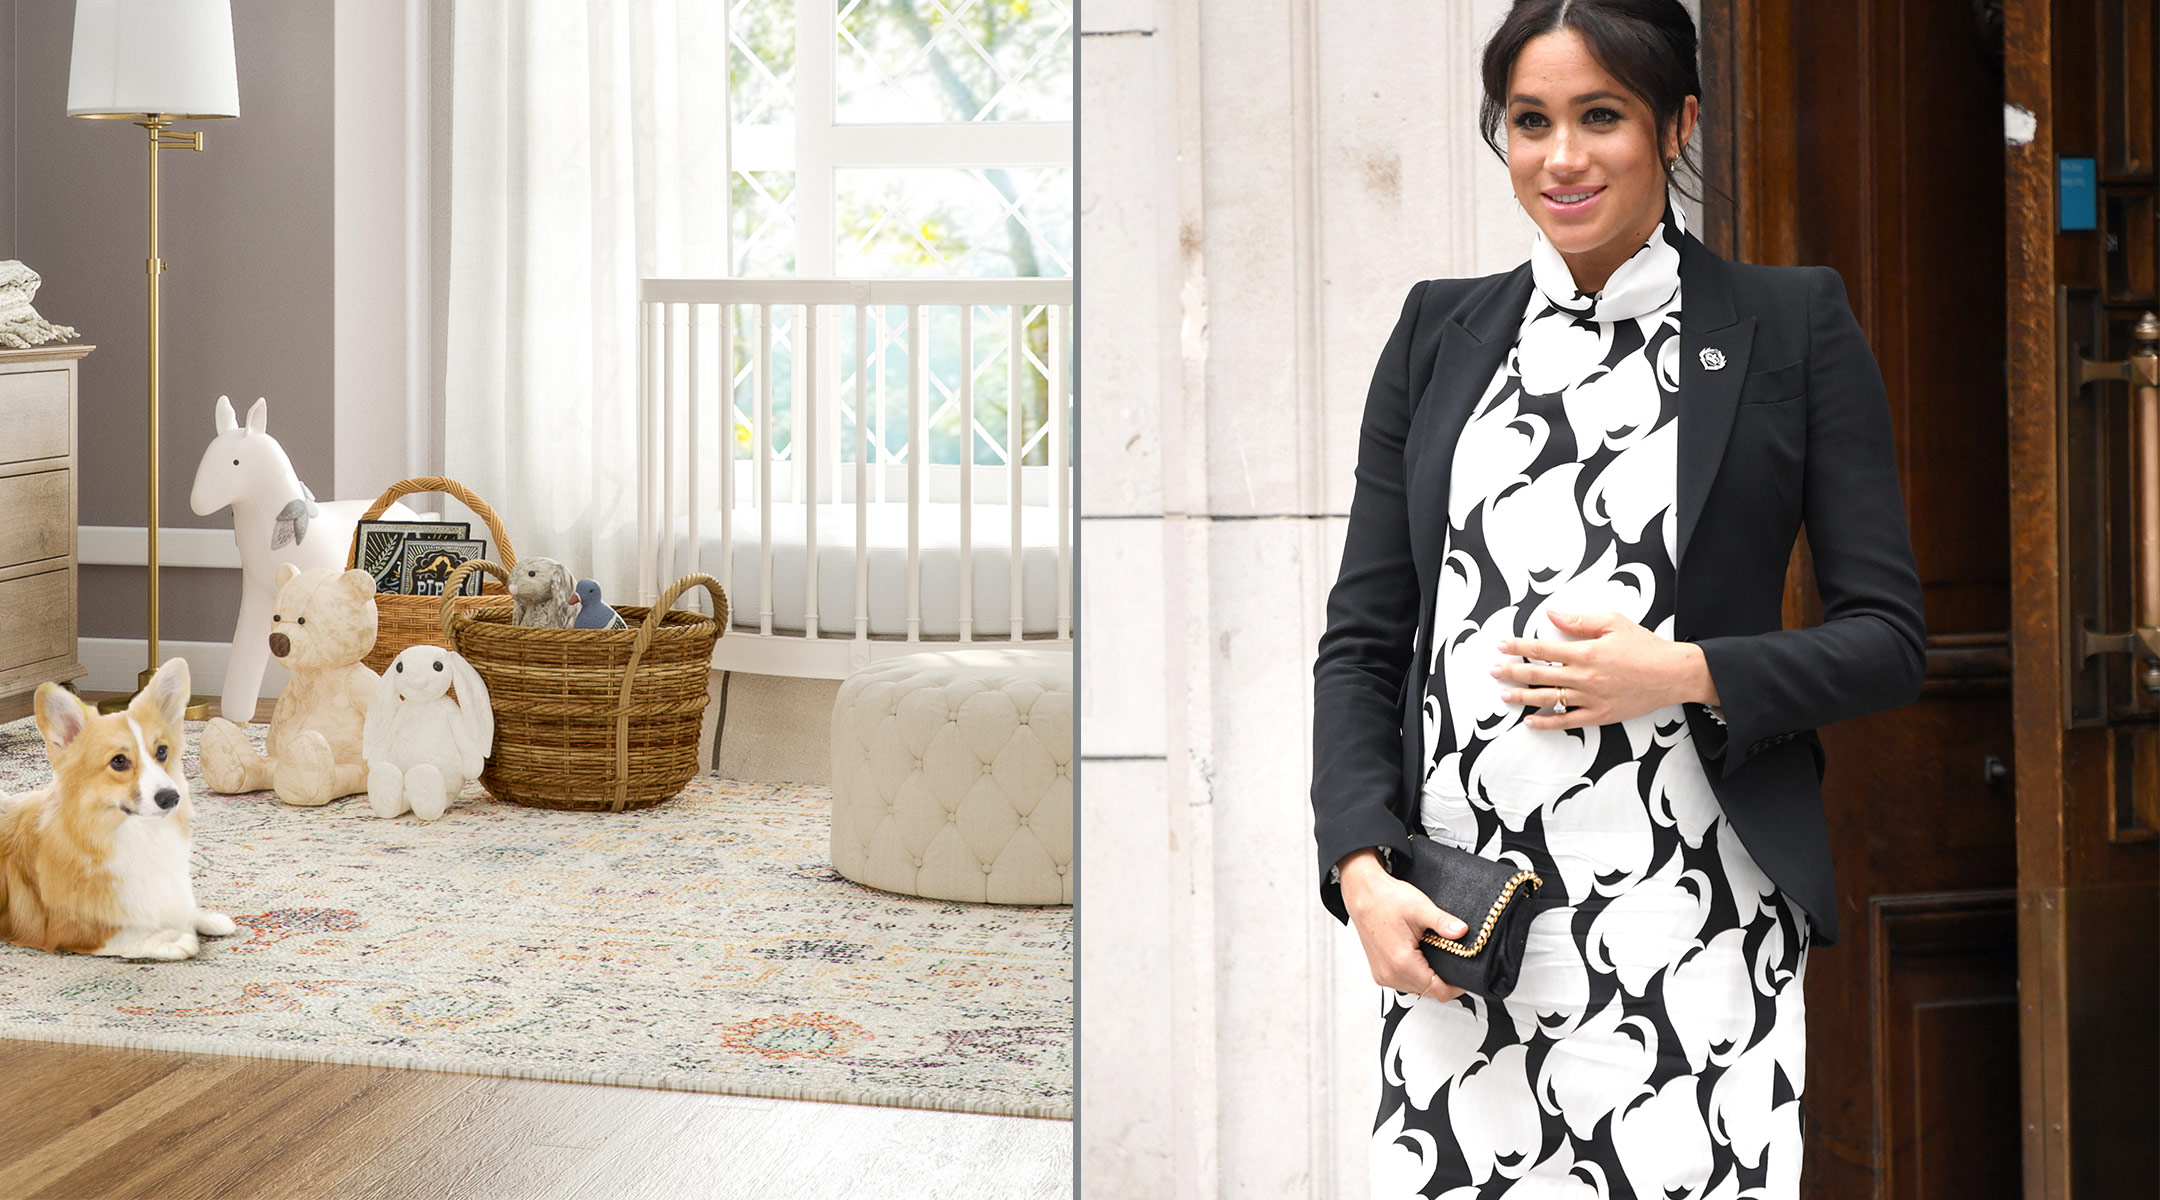 interior design company puts together imagined design for meghan markle's baby